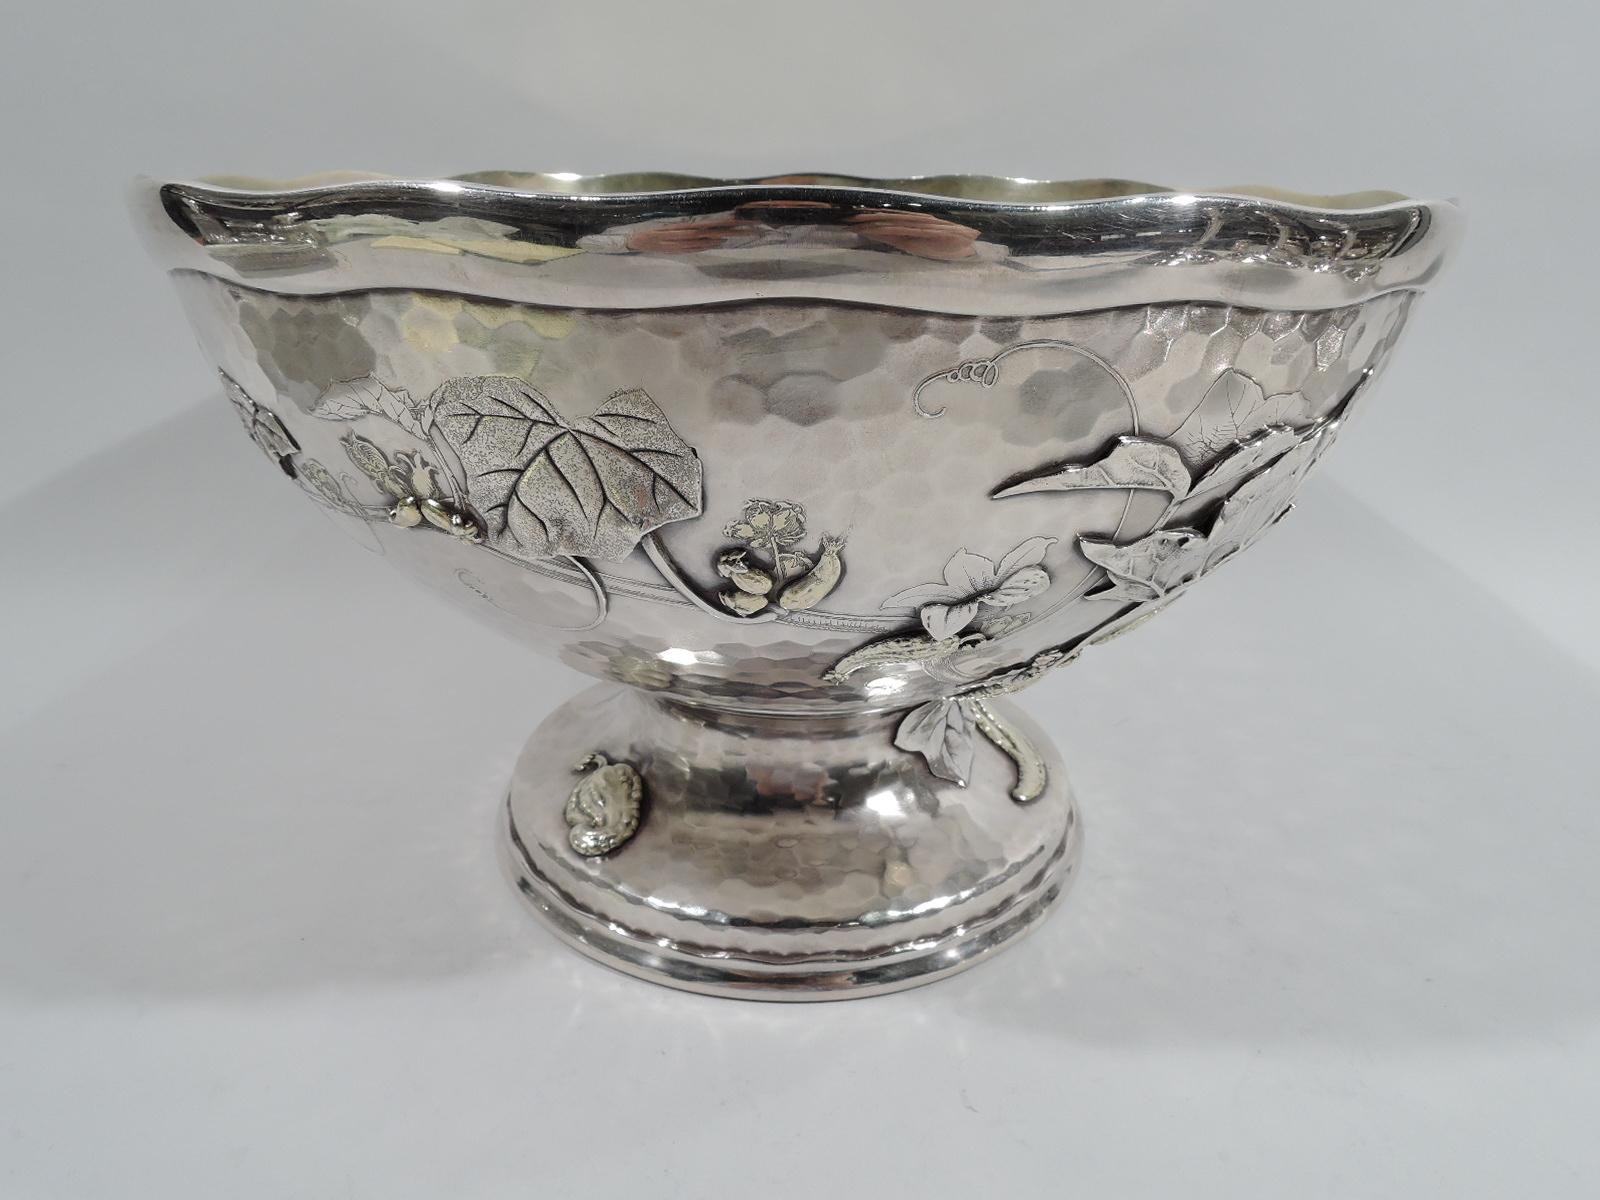 Japonesque sterling silver centerpiece bowl. Made by Tiffany & Co. in New York, ca 1877. Hemispheric with wavy rim; round and stepped foot. Exterior has applied and acid-etched ornament heightened with gilding and engraving: Leafing branches with